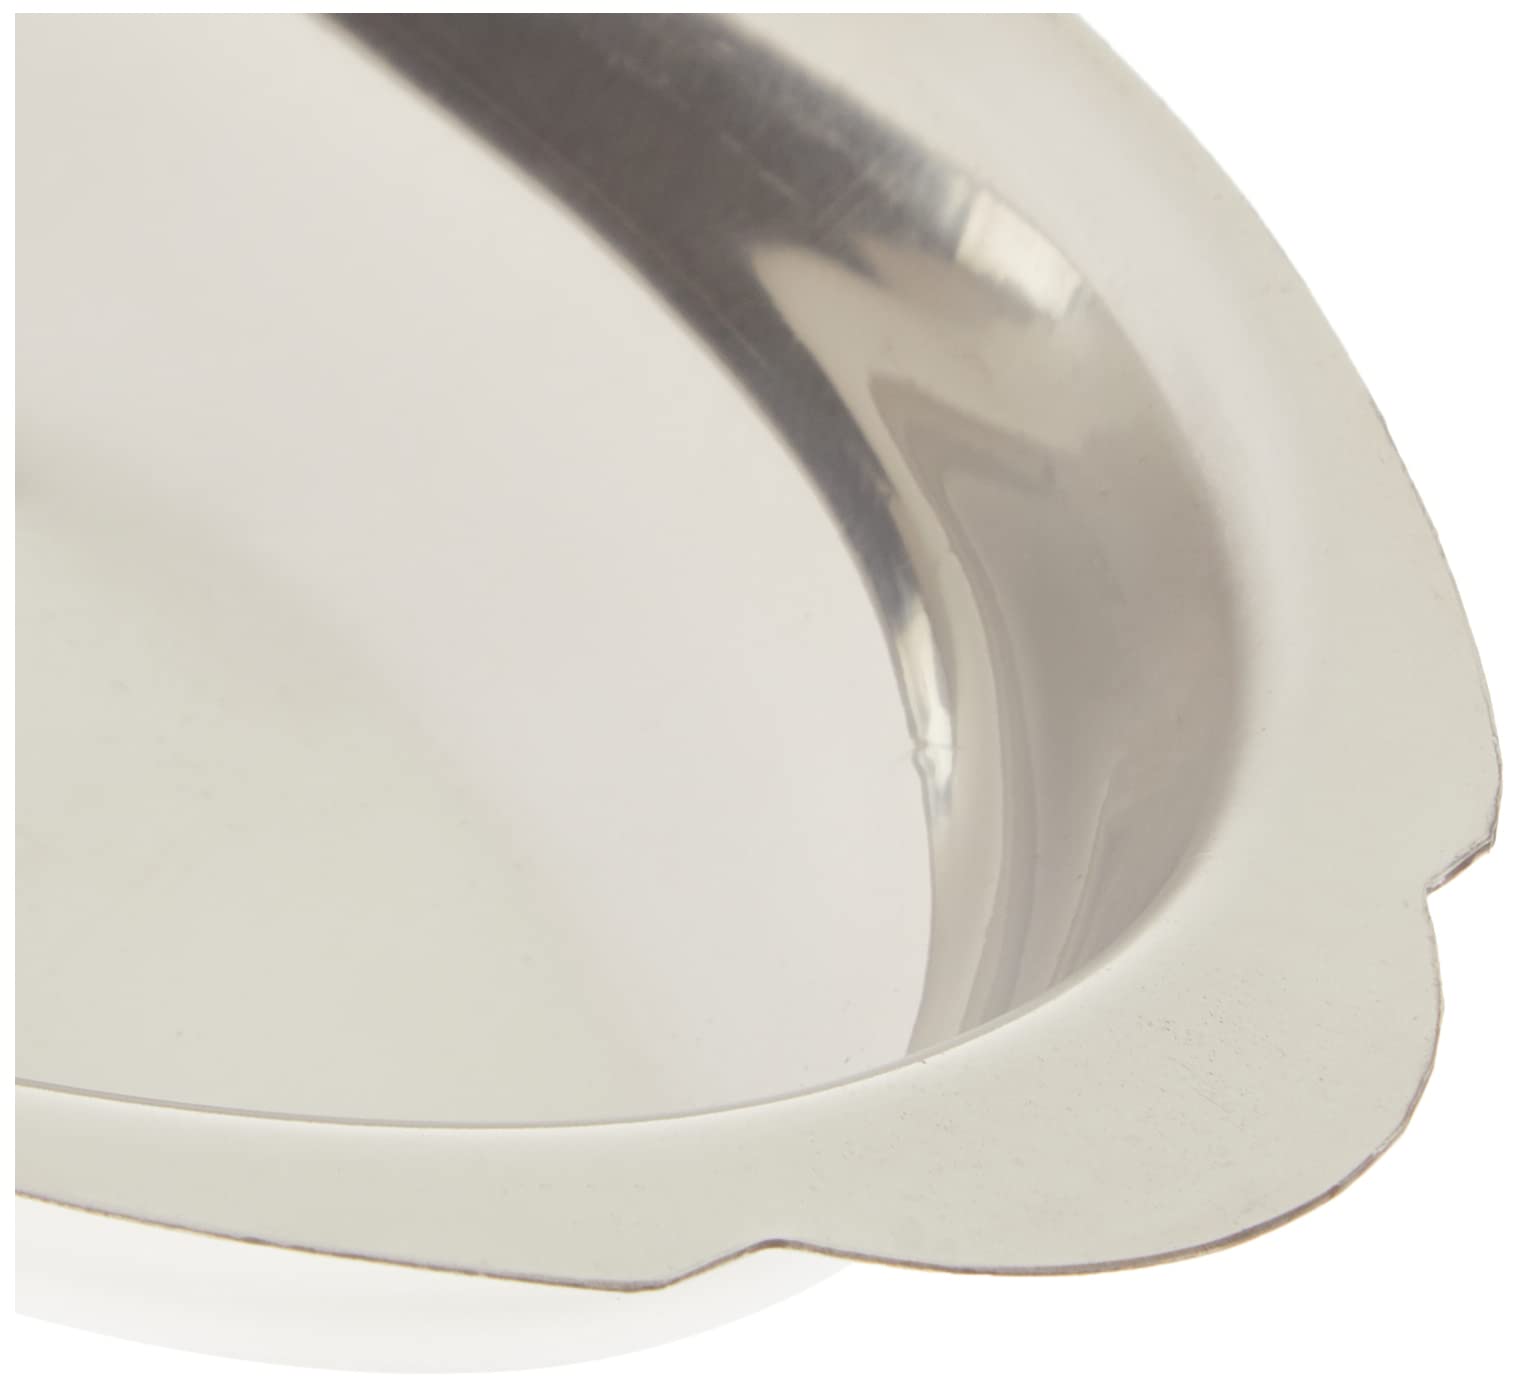 Winco Stainless Steel Oval Au Gratin Dish, 12-Ounce